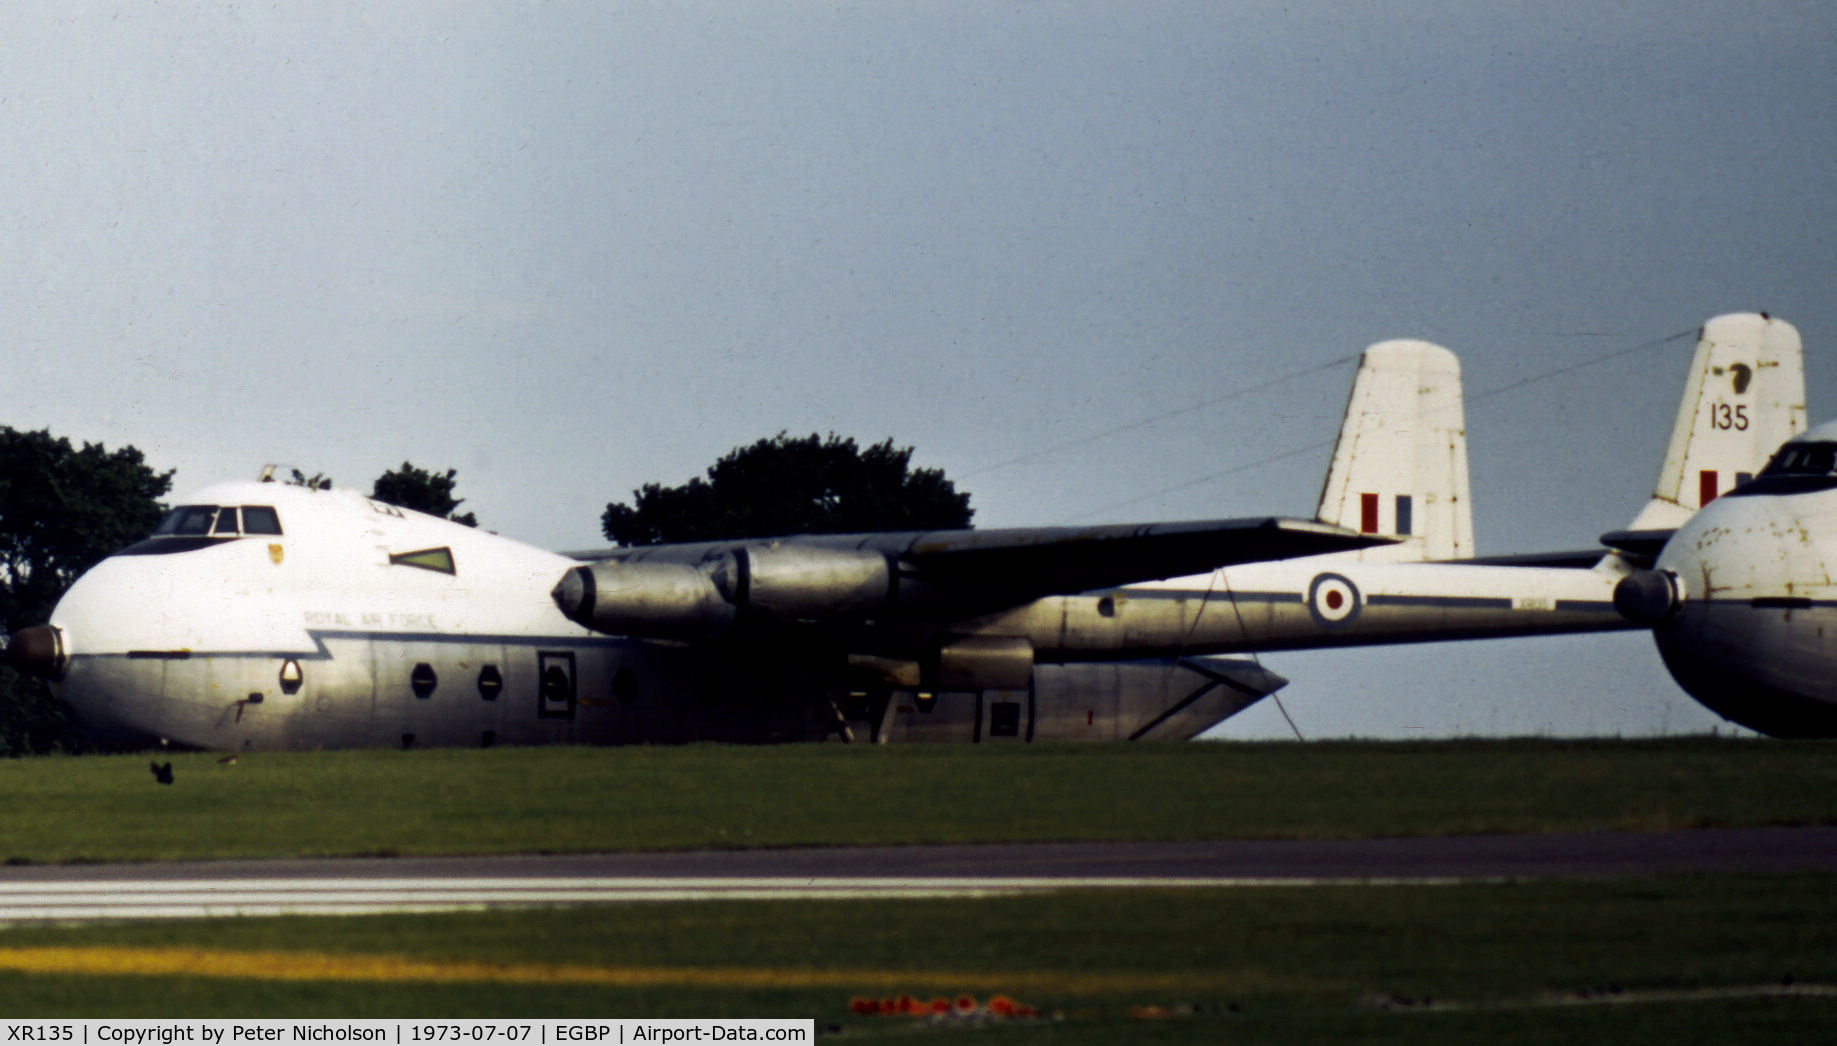 XR135, 1963 Armstrong Whitworth AW-660 Argosy C.1 C/N 6790, Argosy C.1 of 114 Squadron at RAF Benson retired from service and awaiting disposal at 5 Maintenance Unit, RAF Kemble in the Summer of 1973.